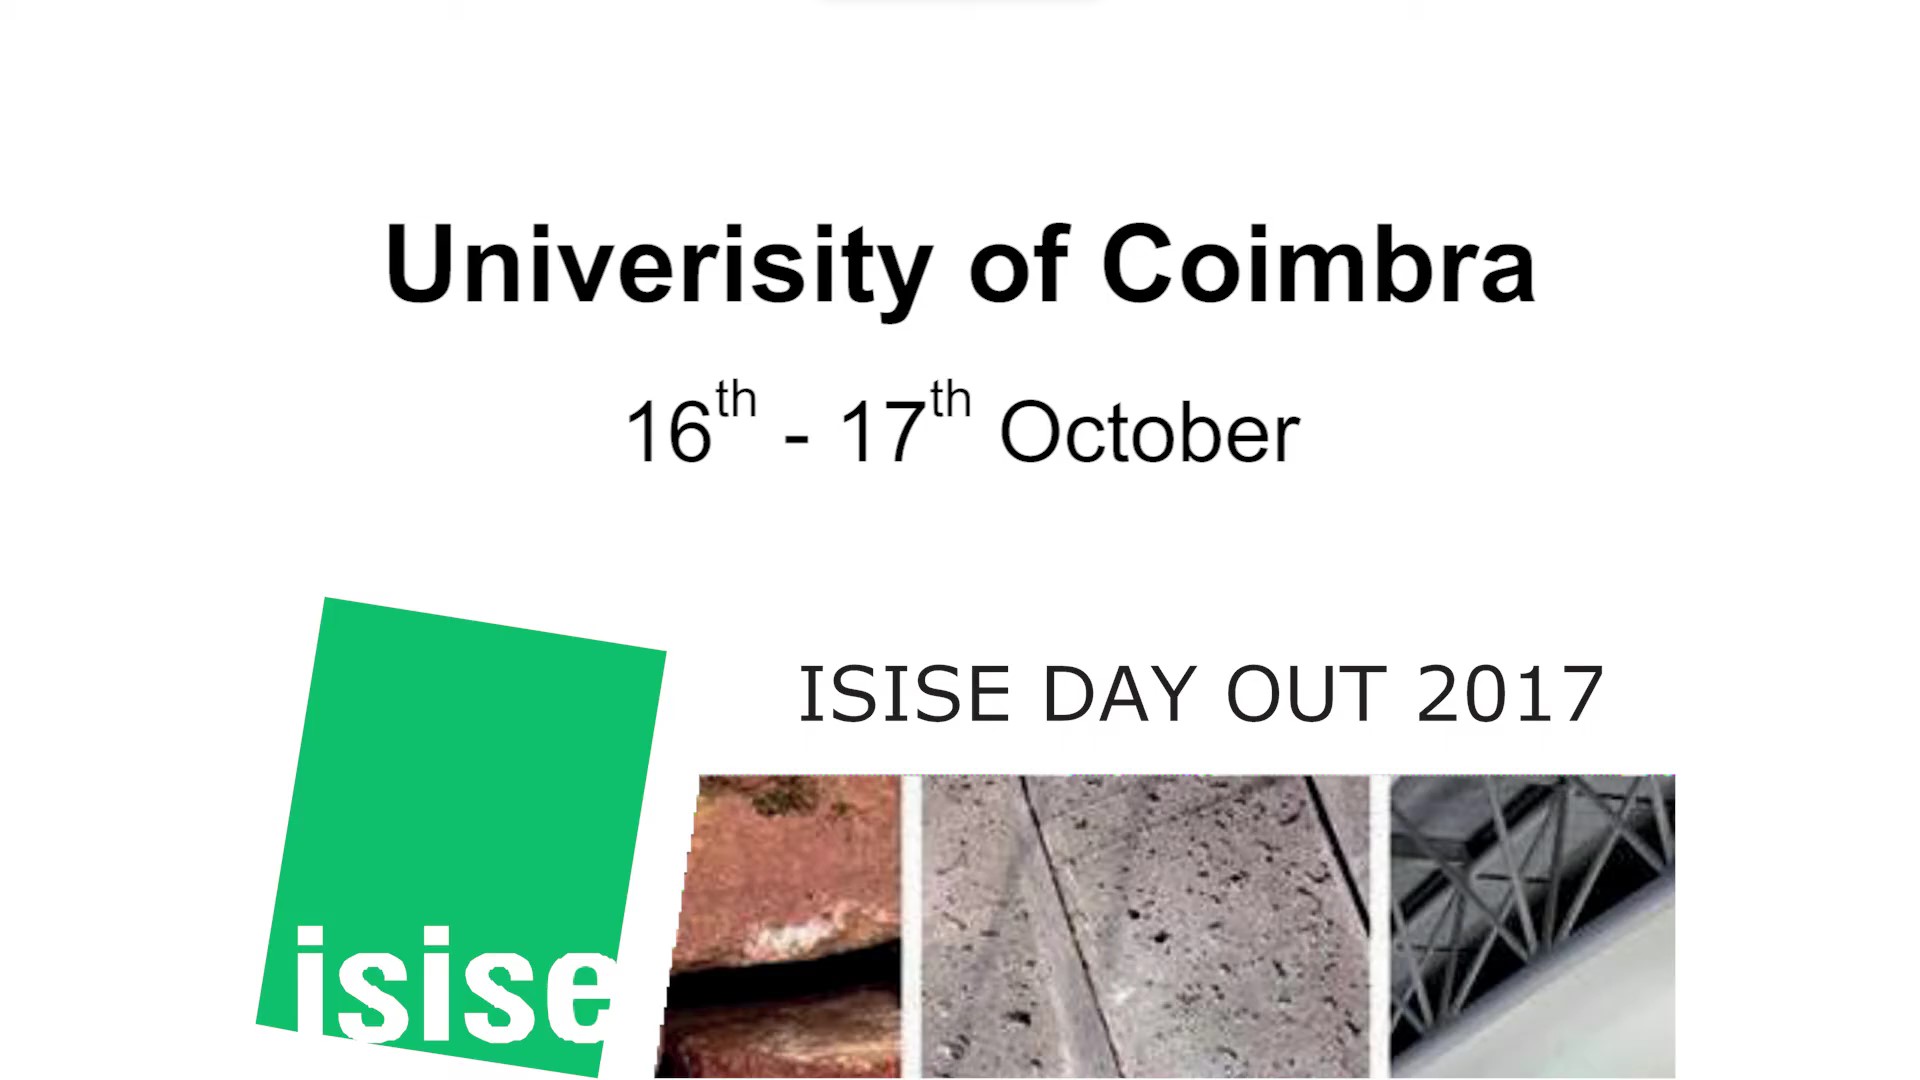 ISISE DAY-OUT 2017 - Short video